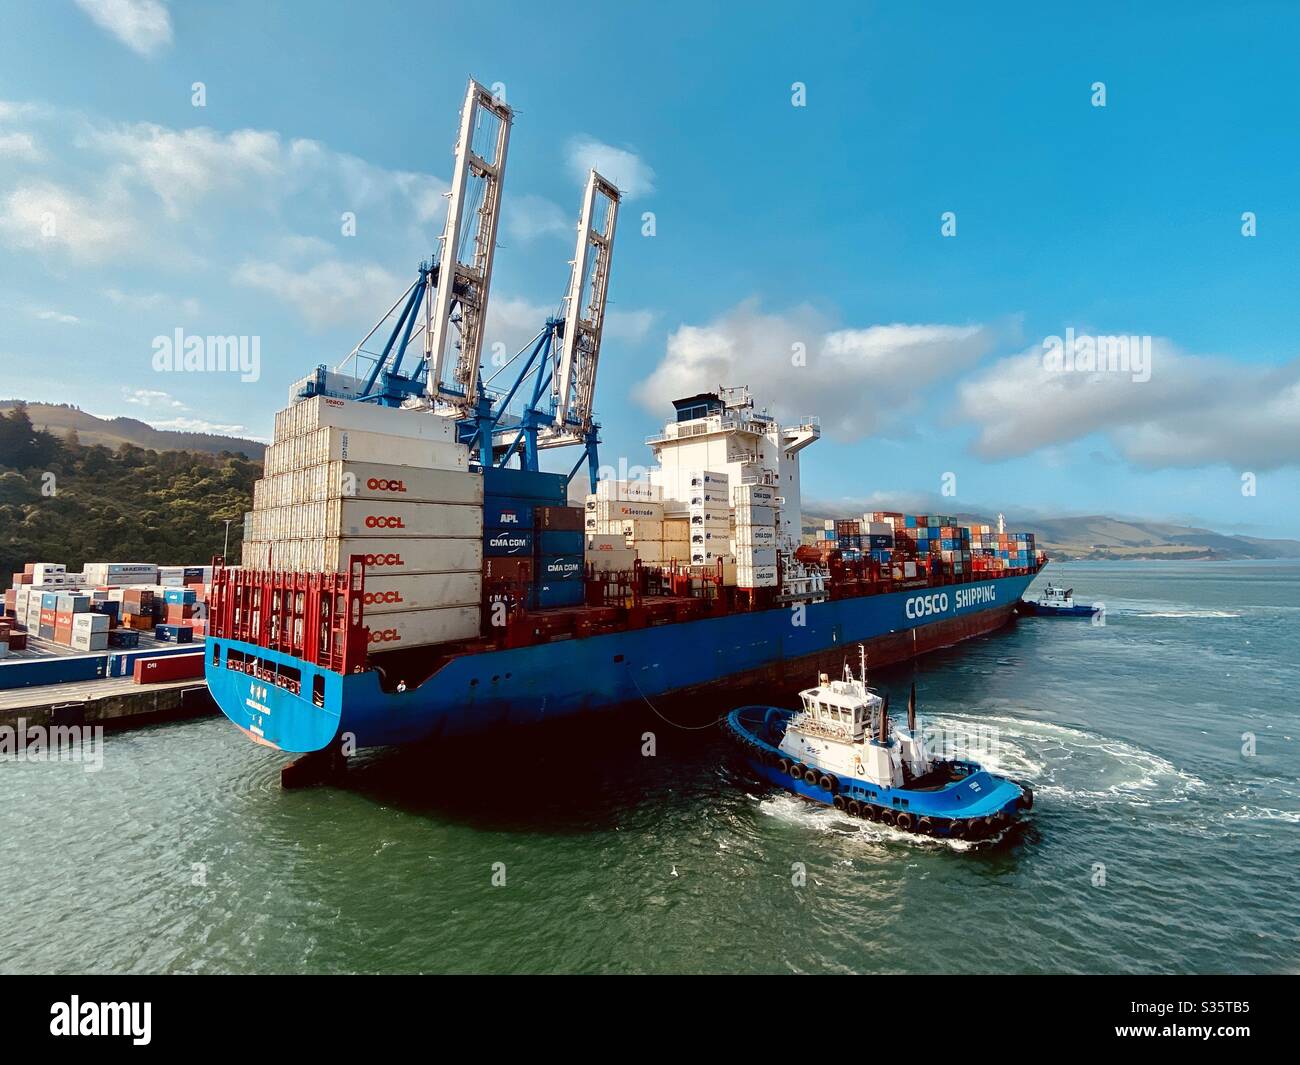 Tugs assisting the docking of a cargo freighter ship in Port Chalmers, Australia, just outside of Dunedin. Stock Photo